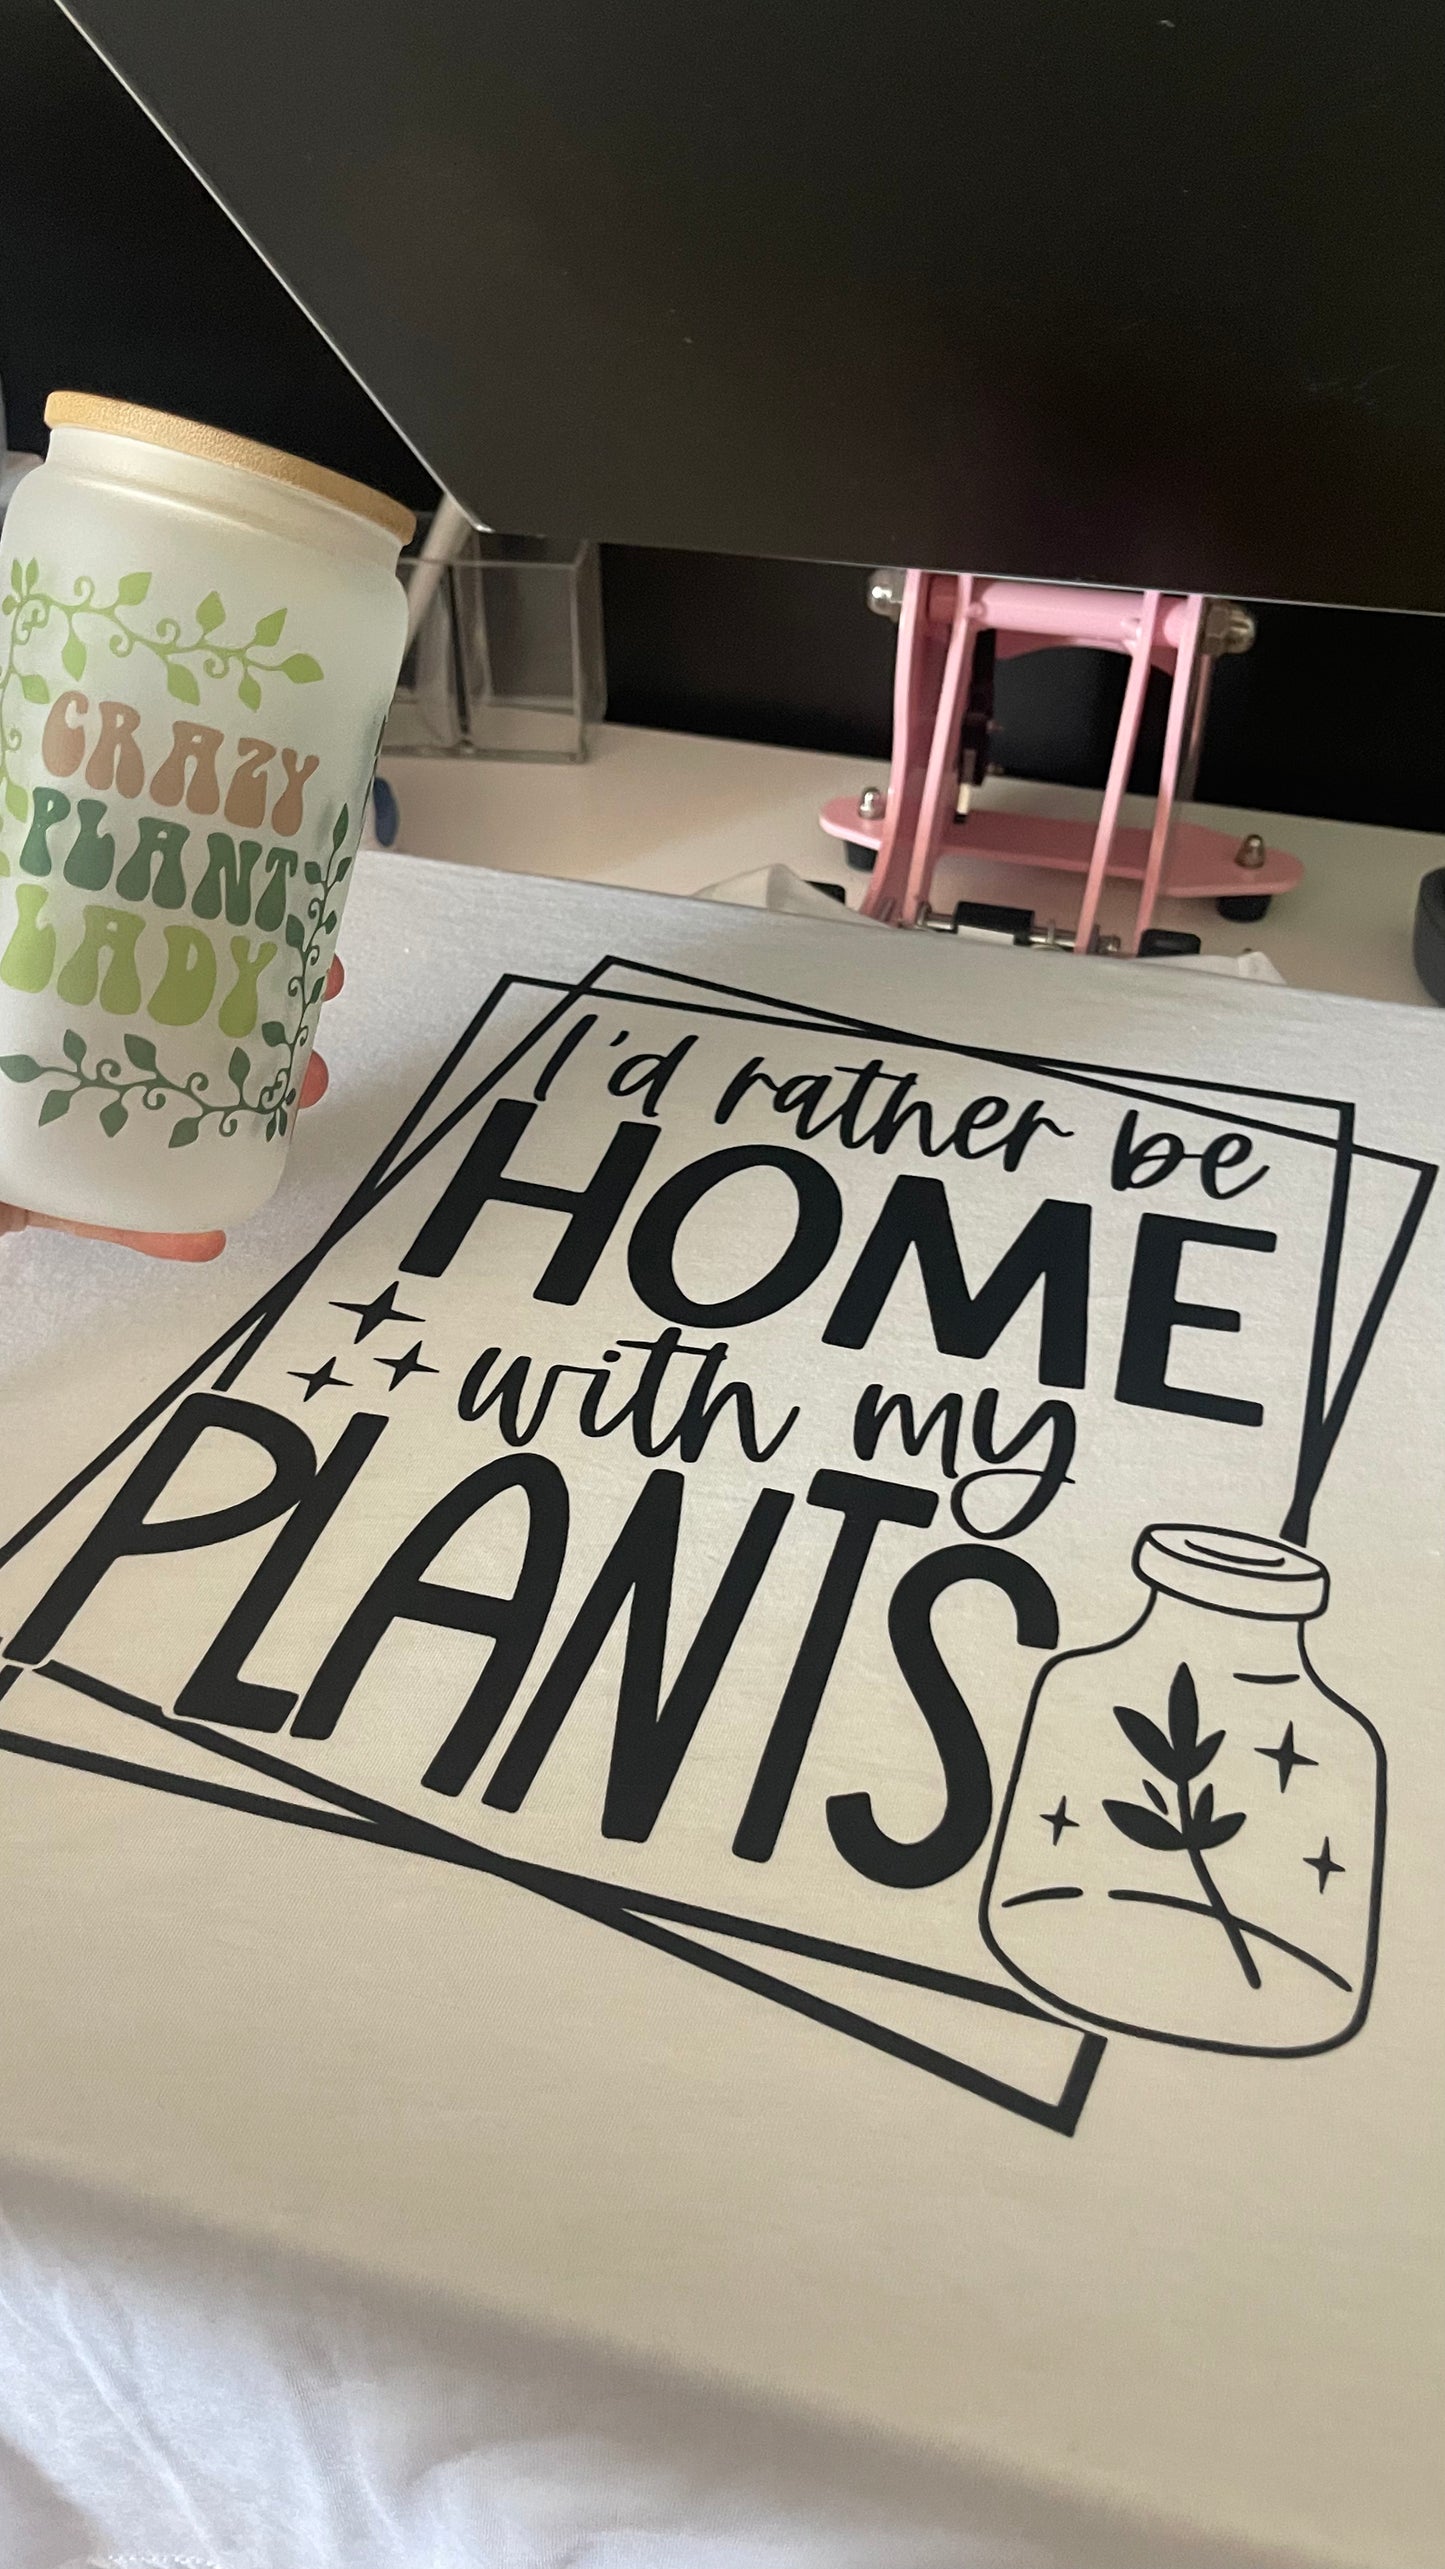 I’d rather be home with my plants